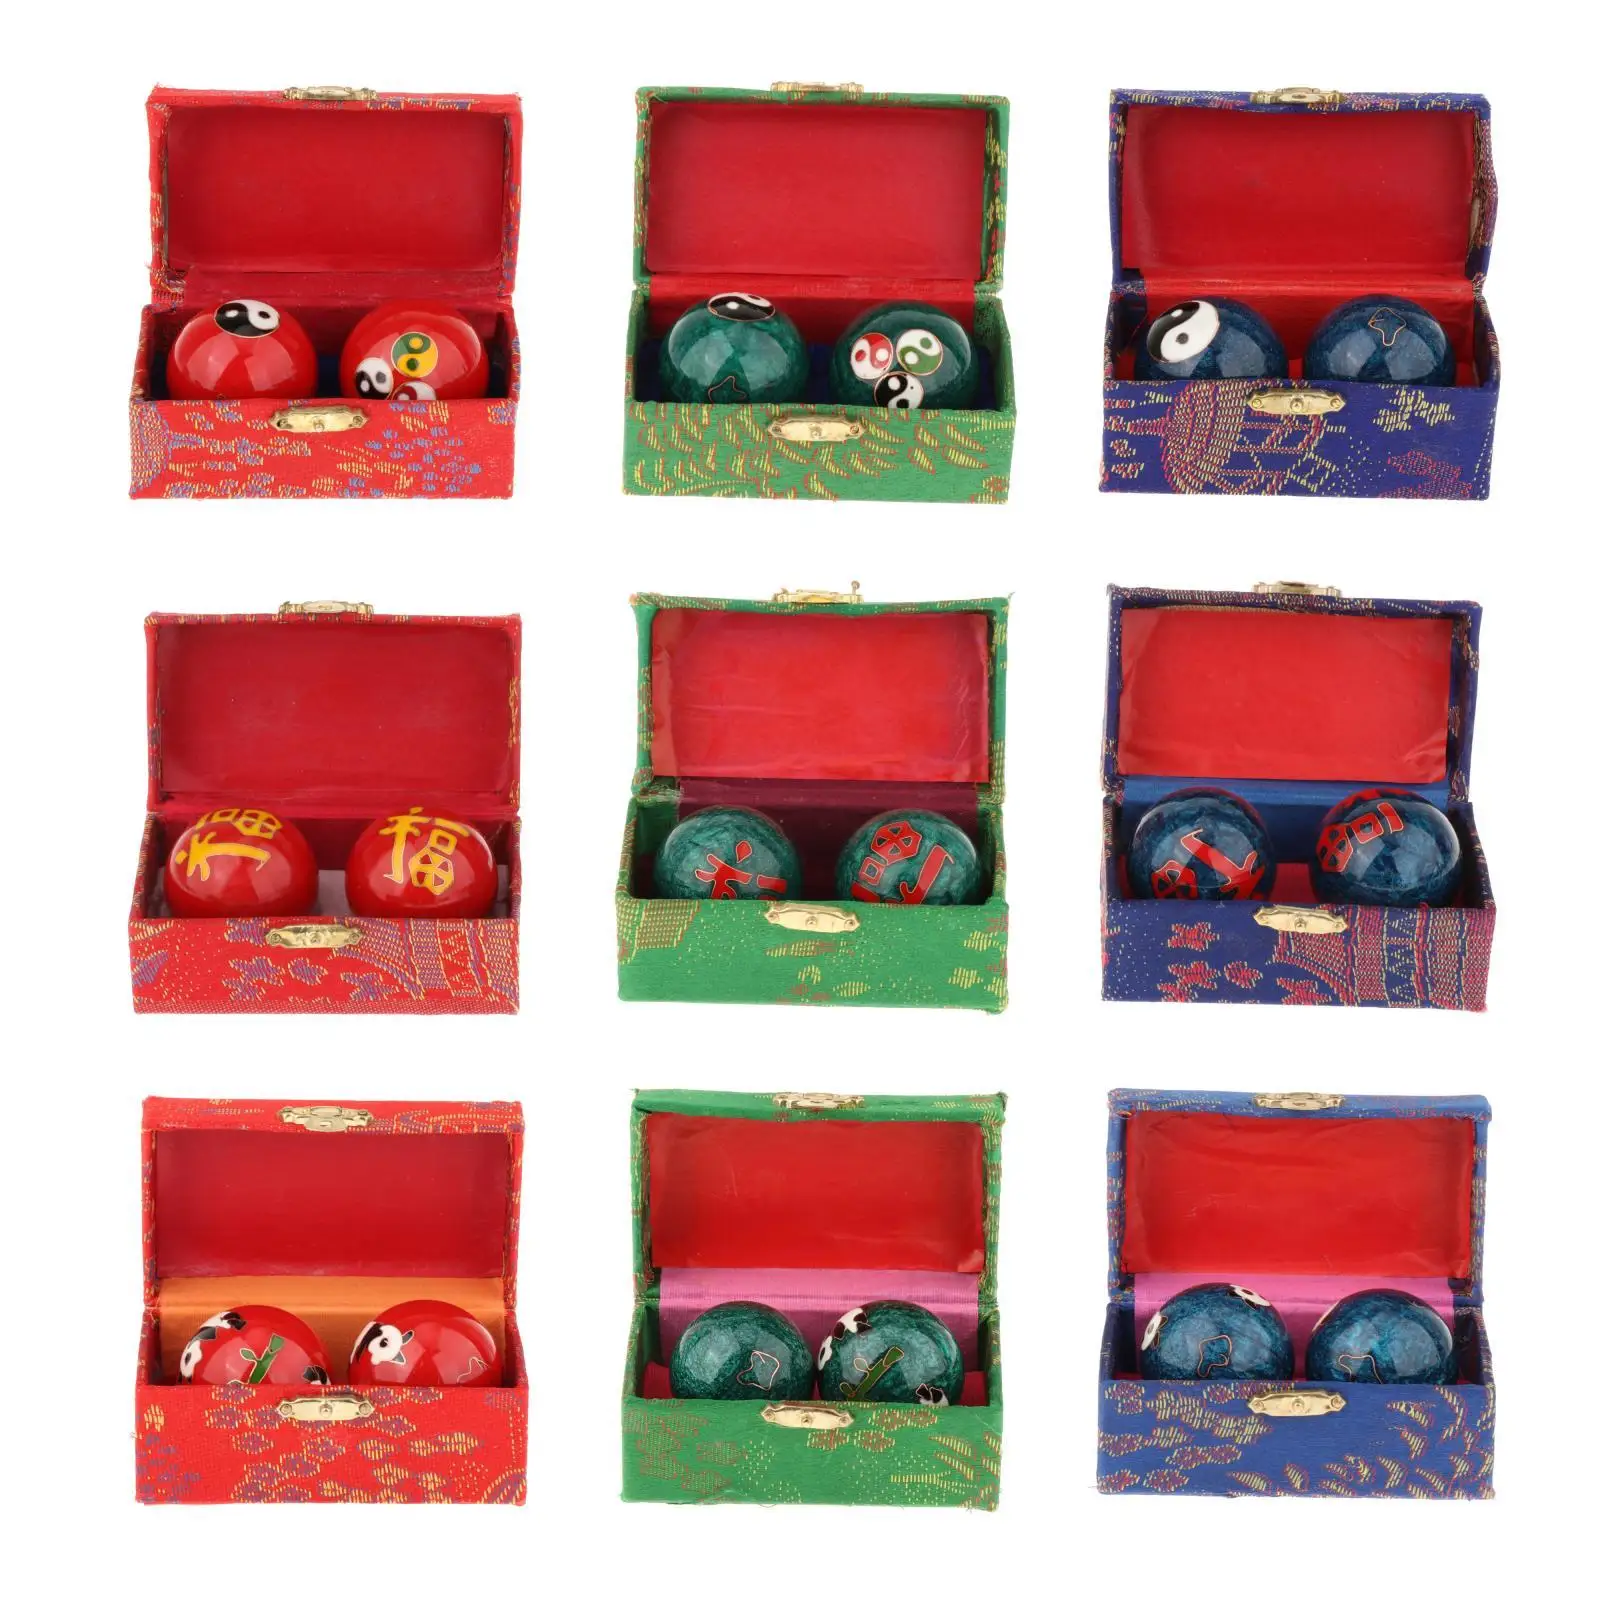 2Pcs Hand Massage Balls with Storage Box Portable Reusable Fitness Chinese Baoding Balls for Seniors Middle Aged People